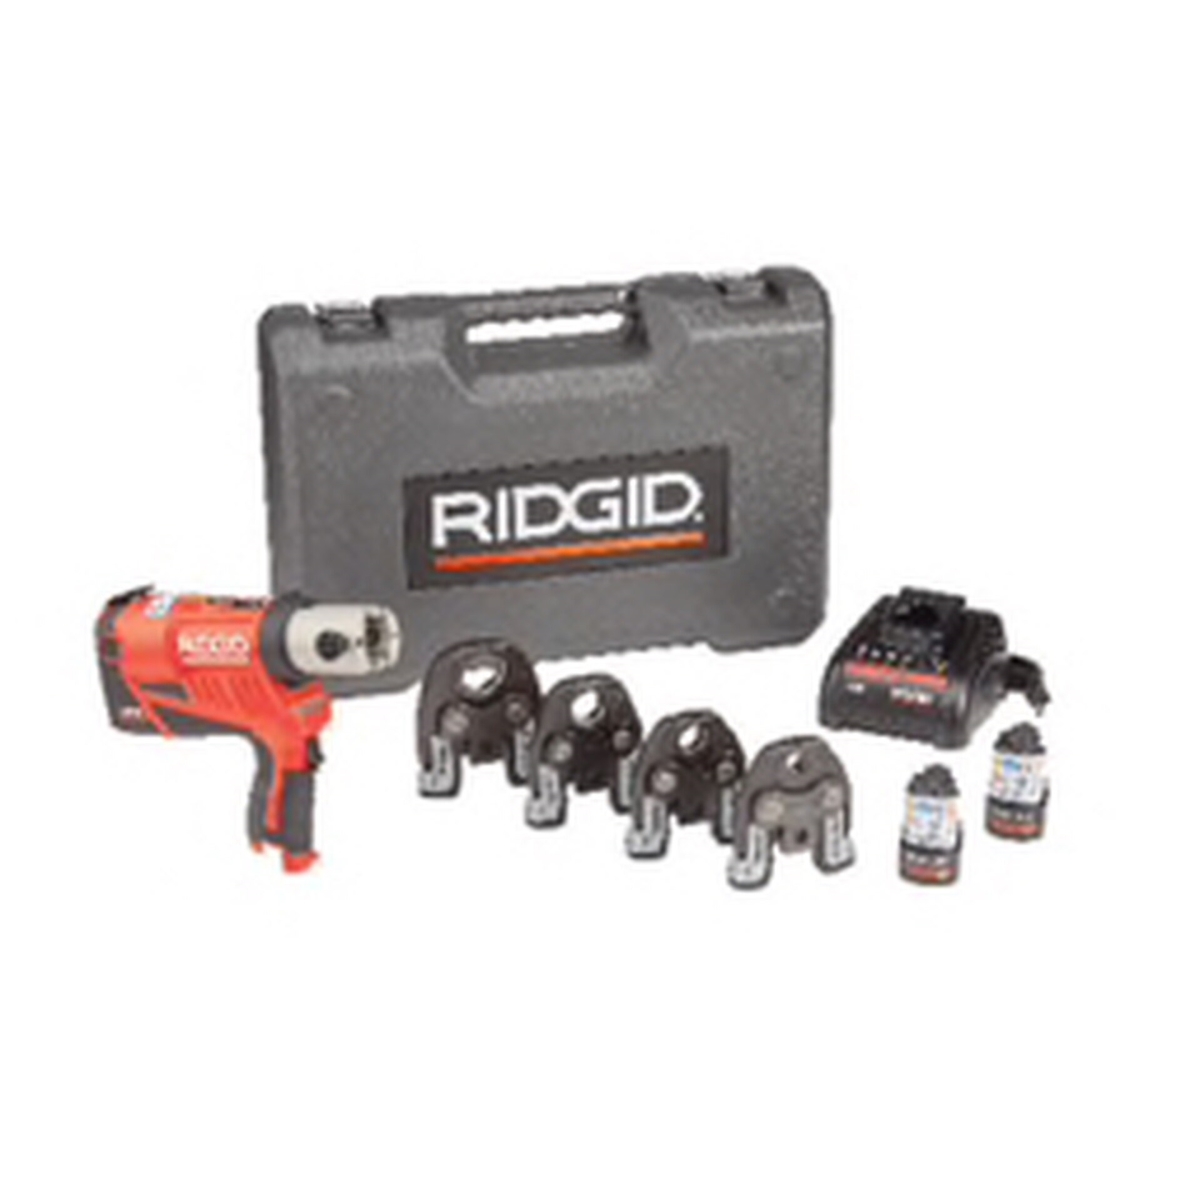 57398 RP-240 Compact Press Tool Kit with 0.5-1.25 in. Propress Jaws -  Ridgid